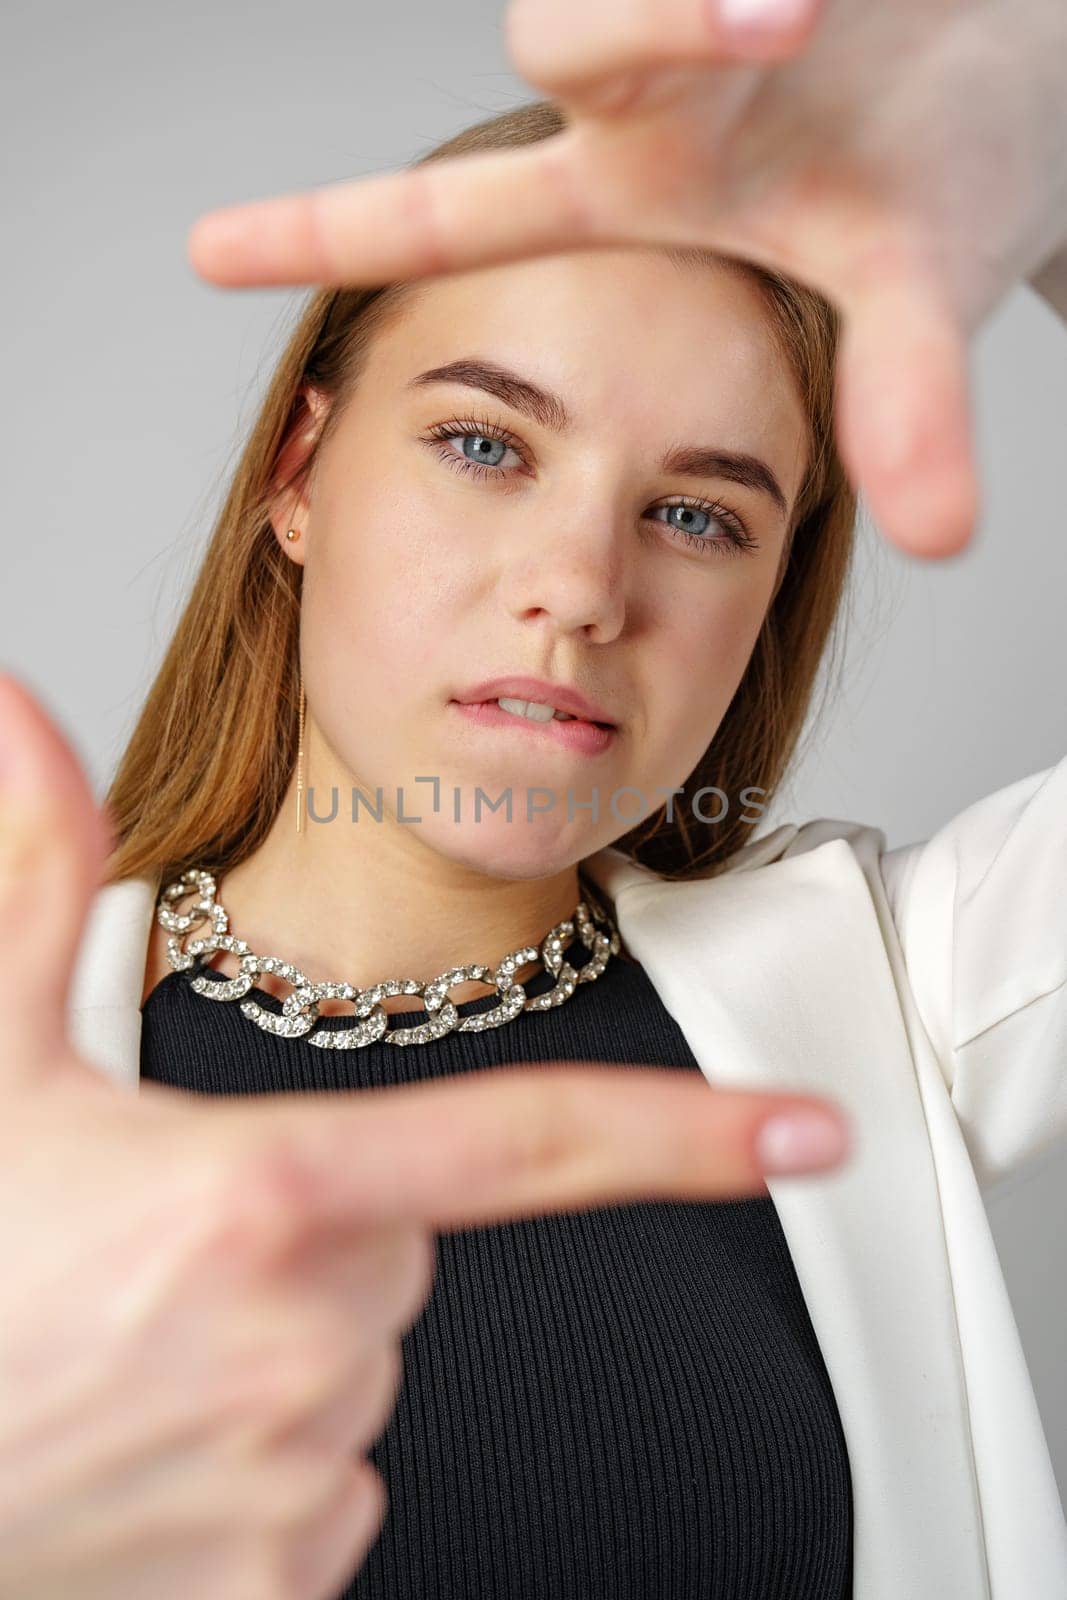 Young Woman Making Frame Gesture With Hands Against a Neutral Background in studio